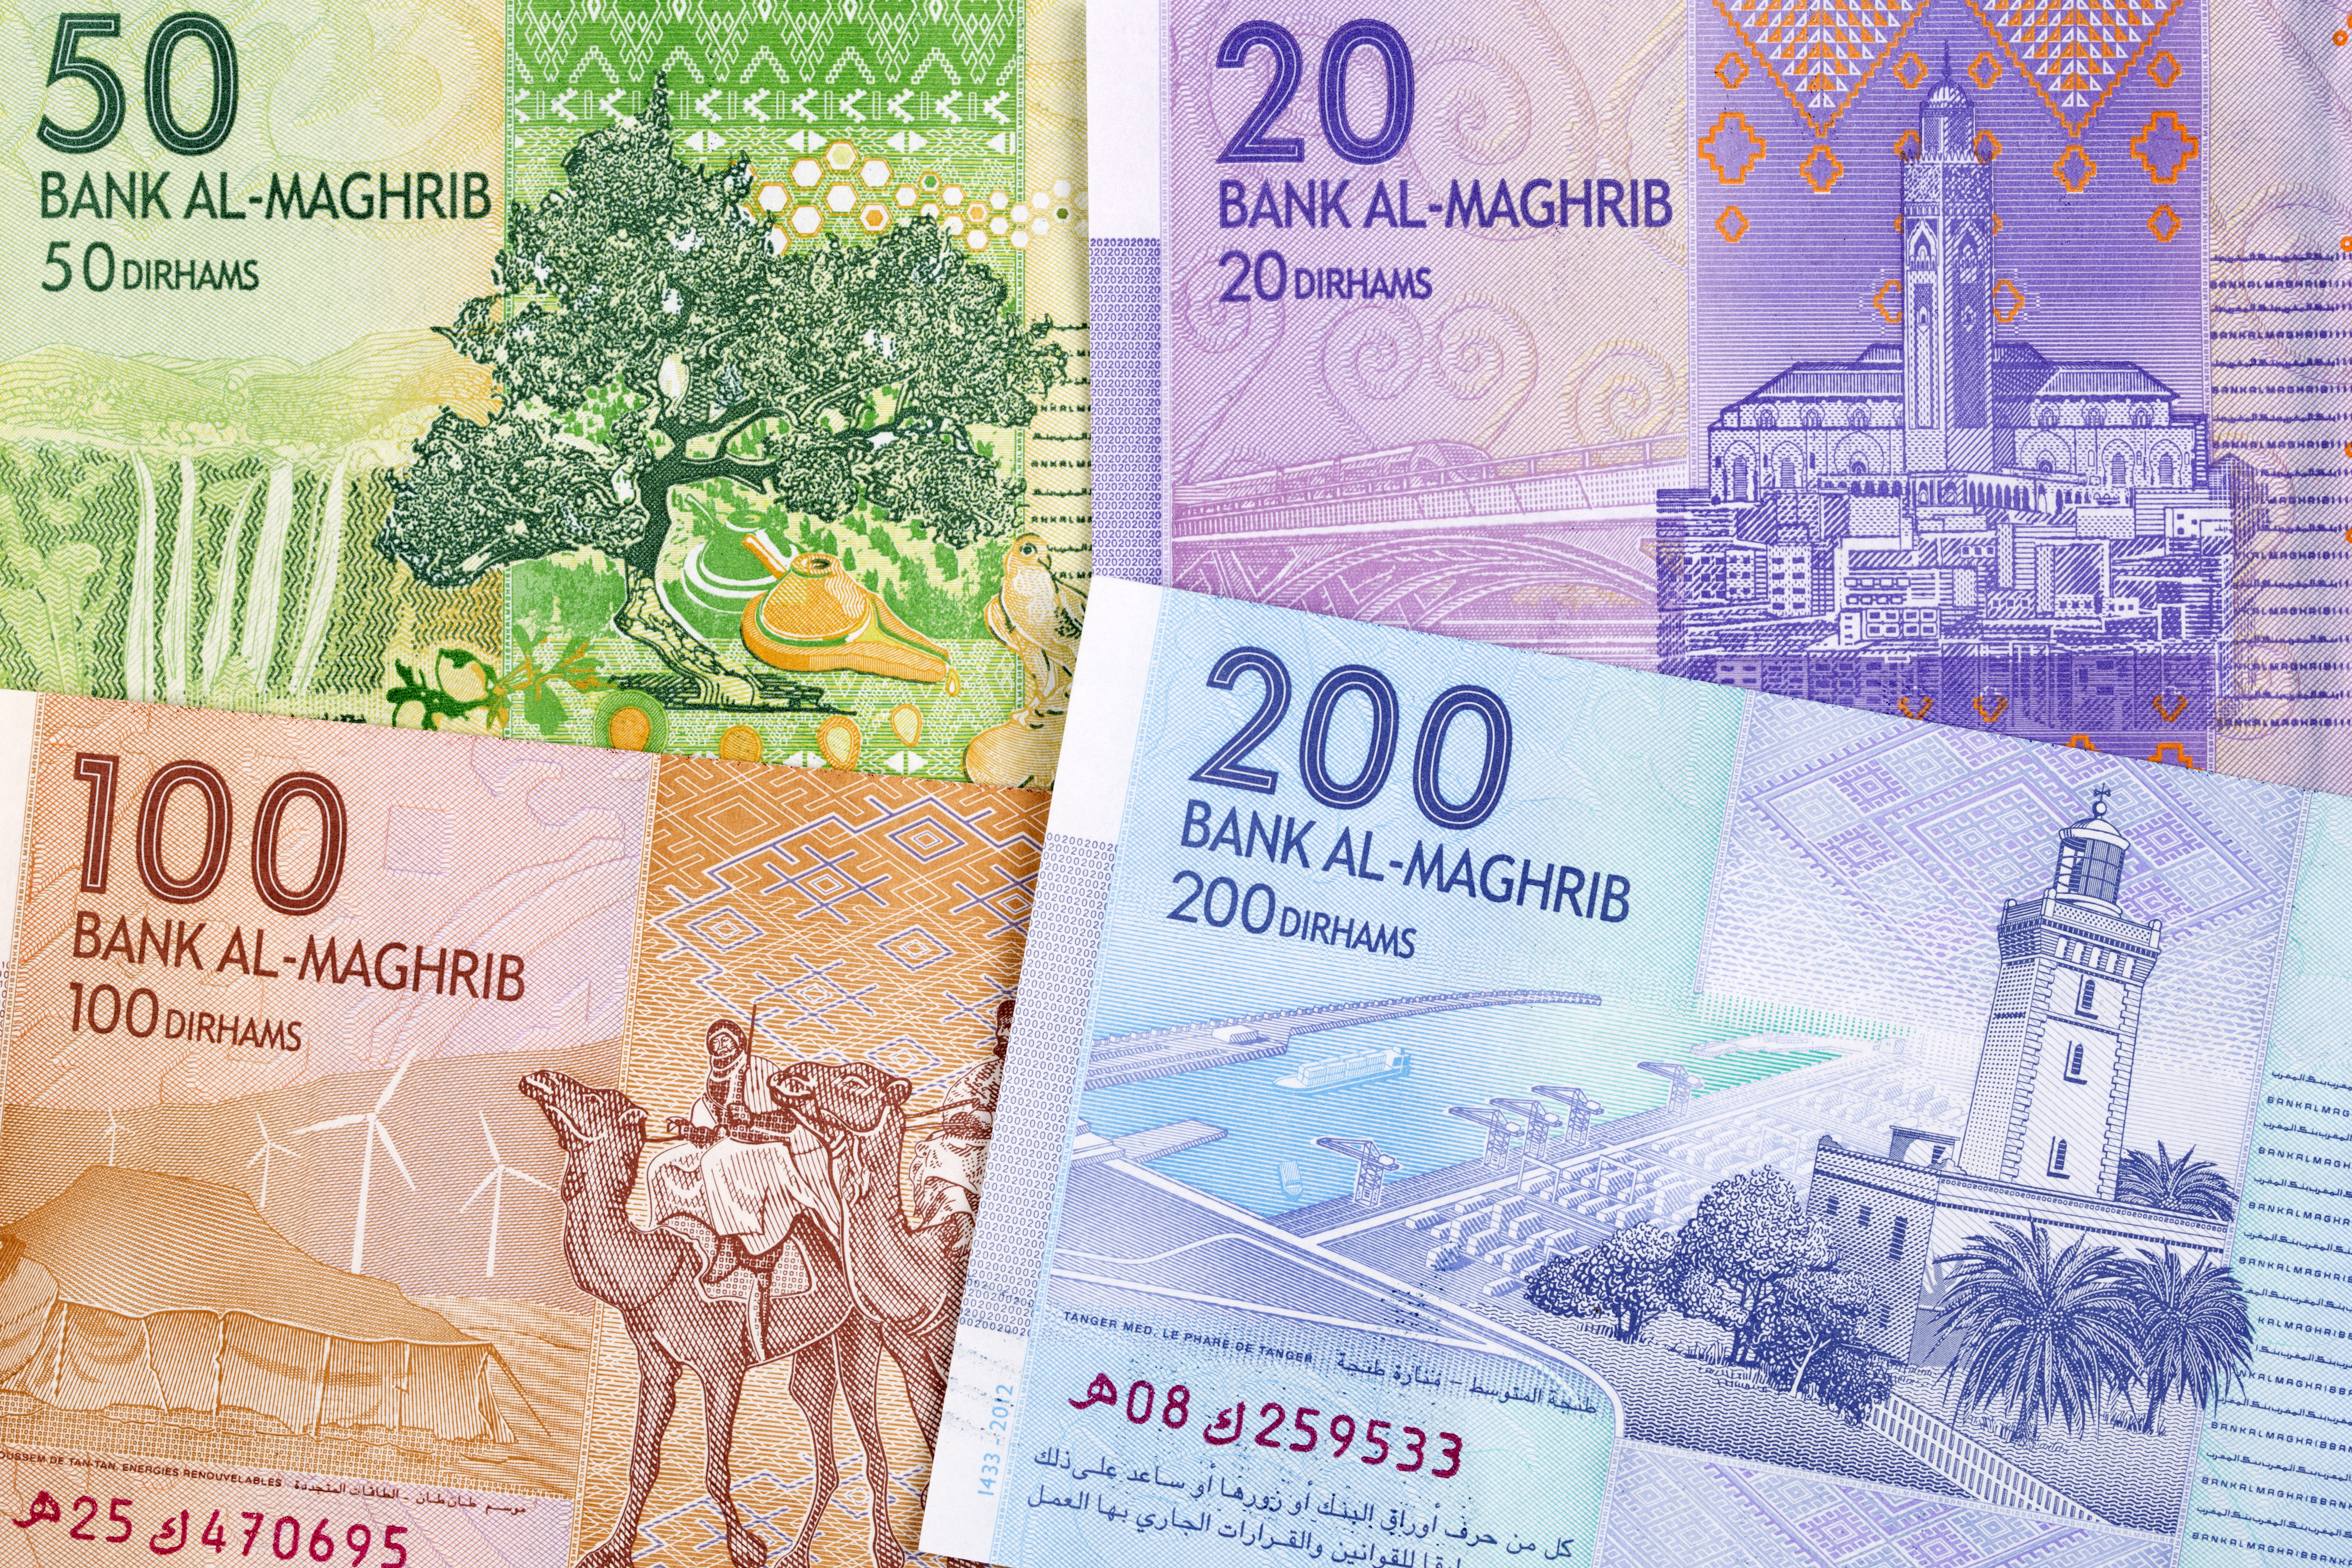 Dirhams are used in Morocco